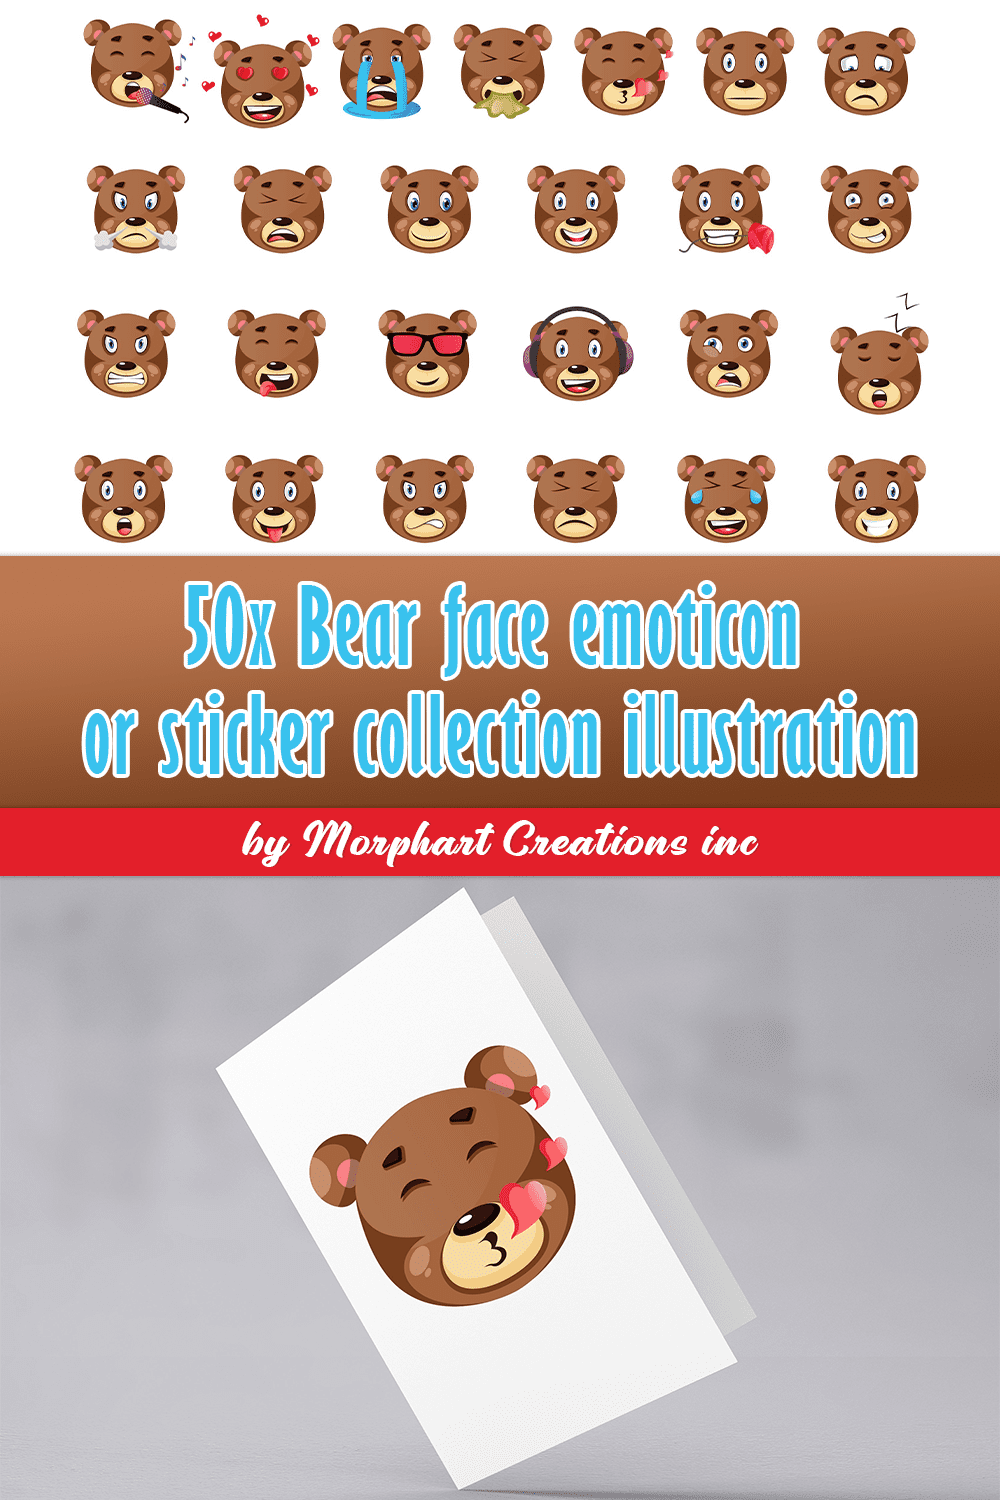 Bundle with gorgeous images of bear faces emoticons.